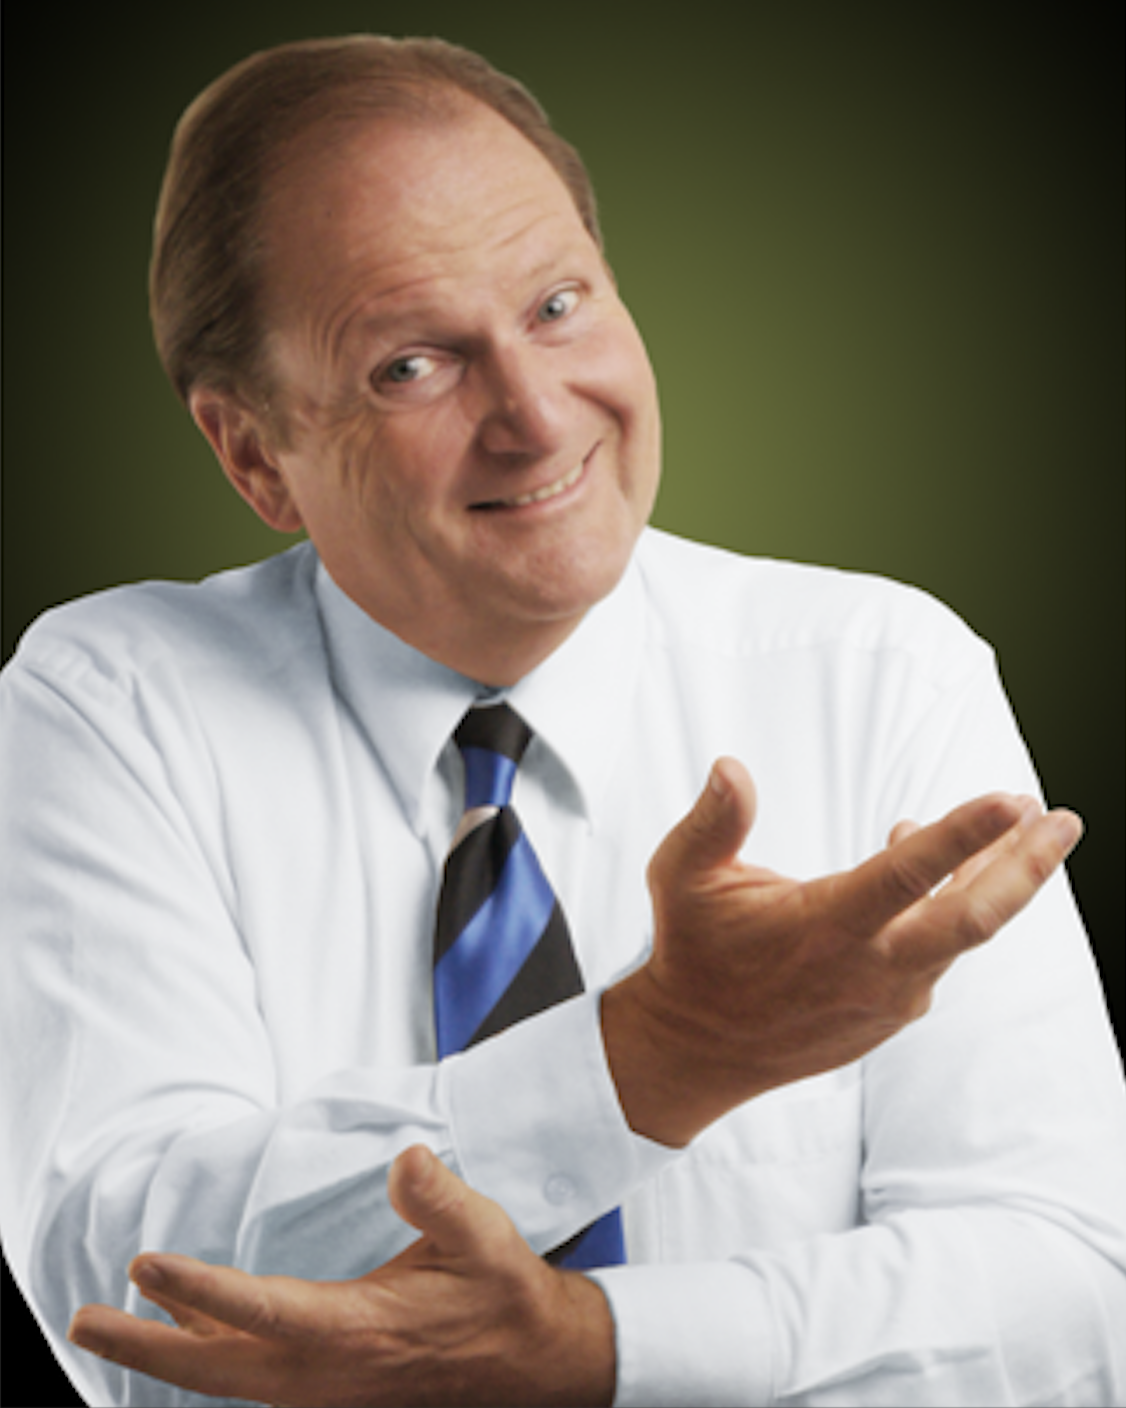 Kevin Nelson - Speaker, author and consultant